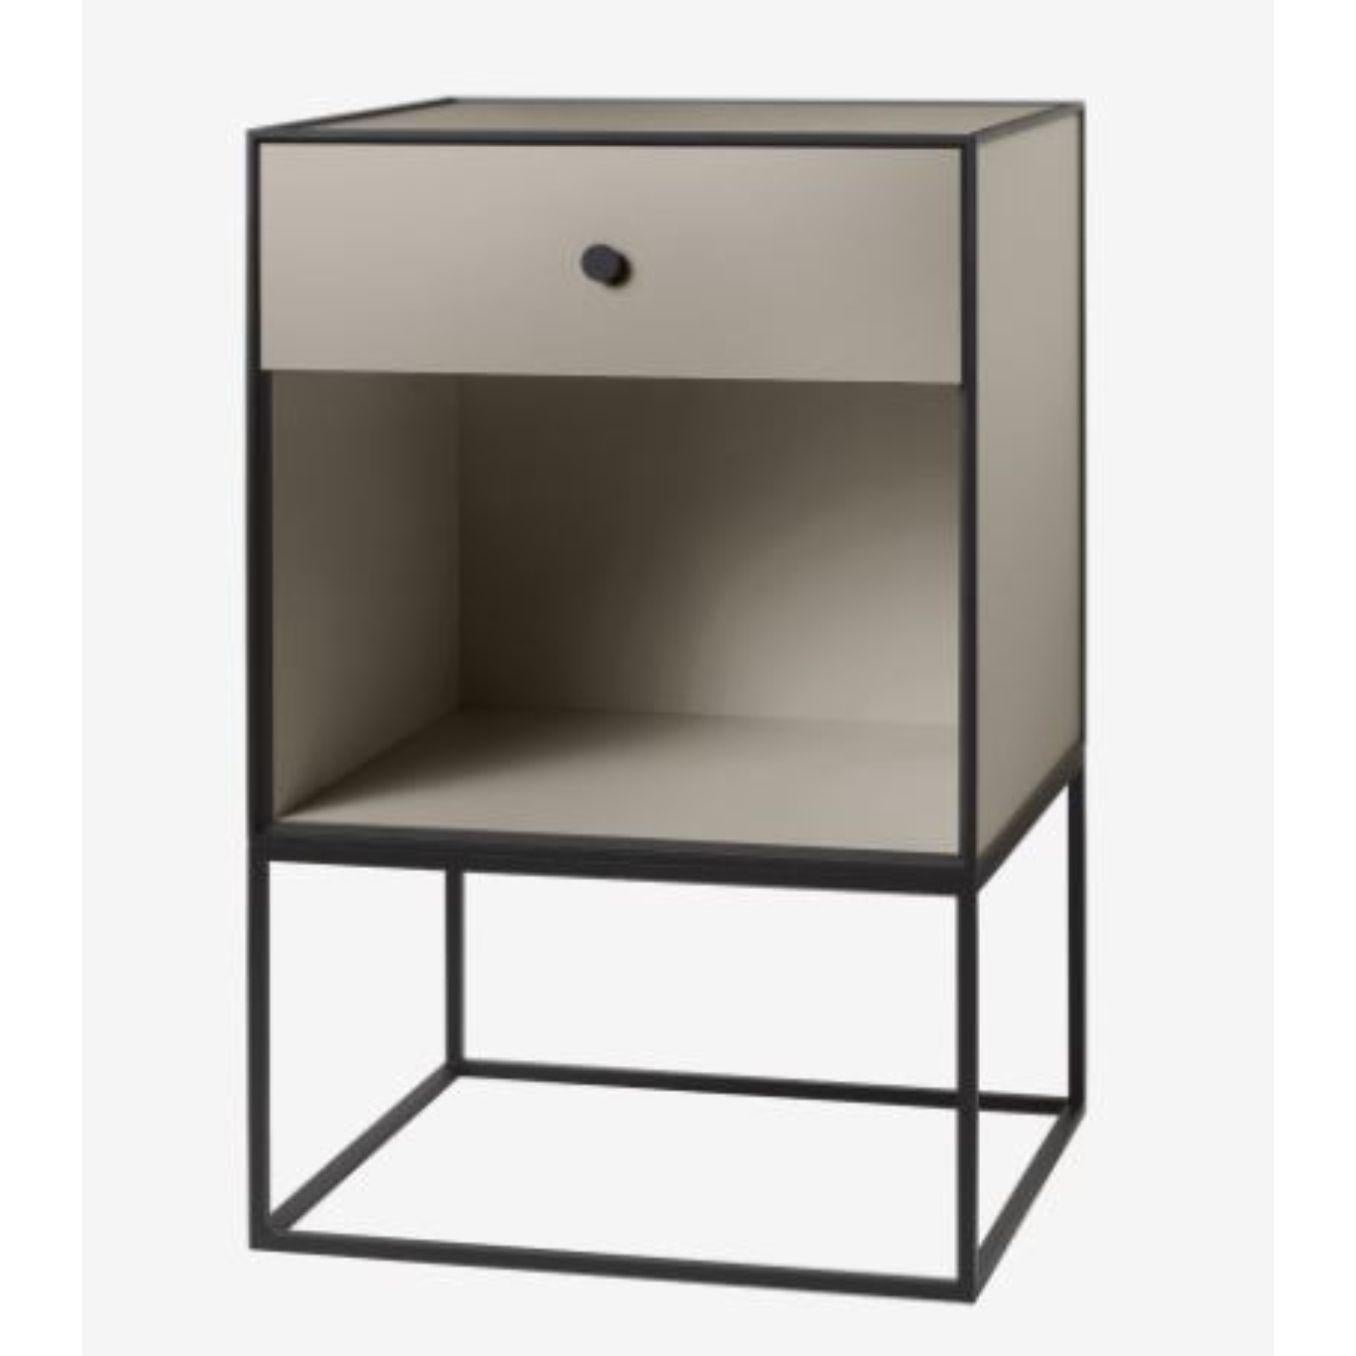 49 sand frame sideboard with 1 drawer by Lassen.
Dimensions: W 49 x D 42 x H 77 cm. 
Materials: Finér, Melamin, Melamine, Metal, Veneer
Also available in different colours and dimensions.
Weight: 15.50 Kg

By Lassen is a Danish design brand